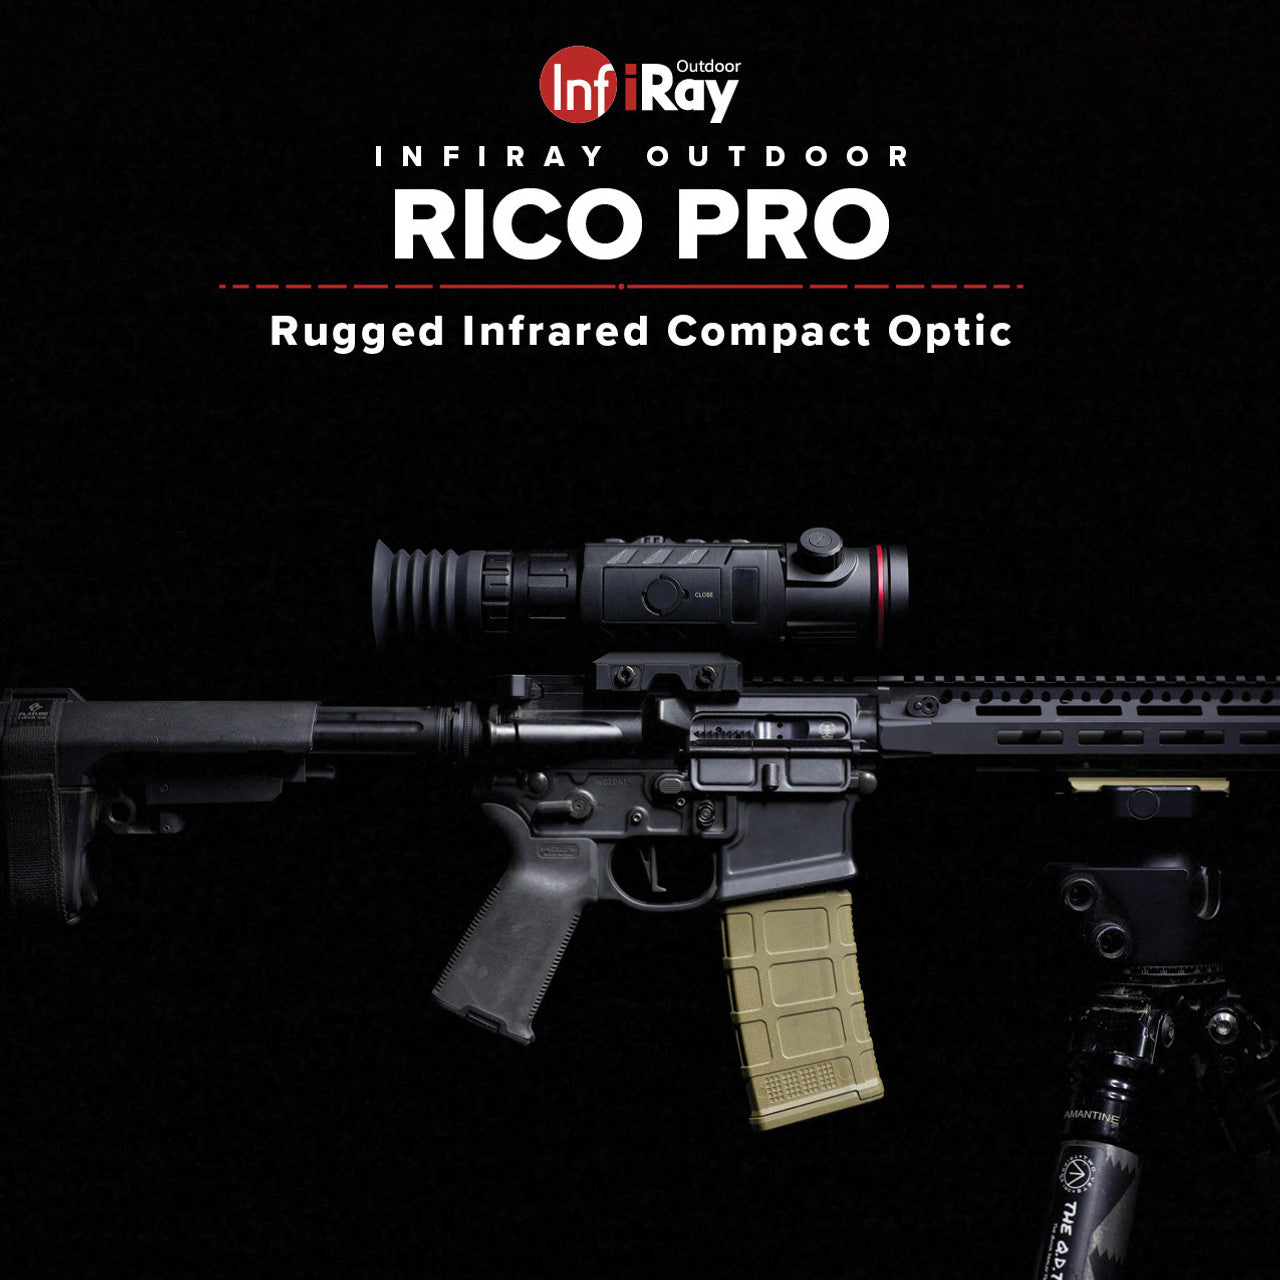 RICO PRO 640 Variable 25/50mm Thermal Weapon Sight